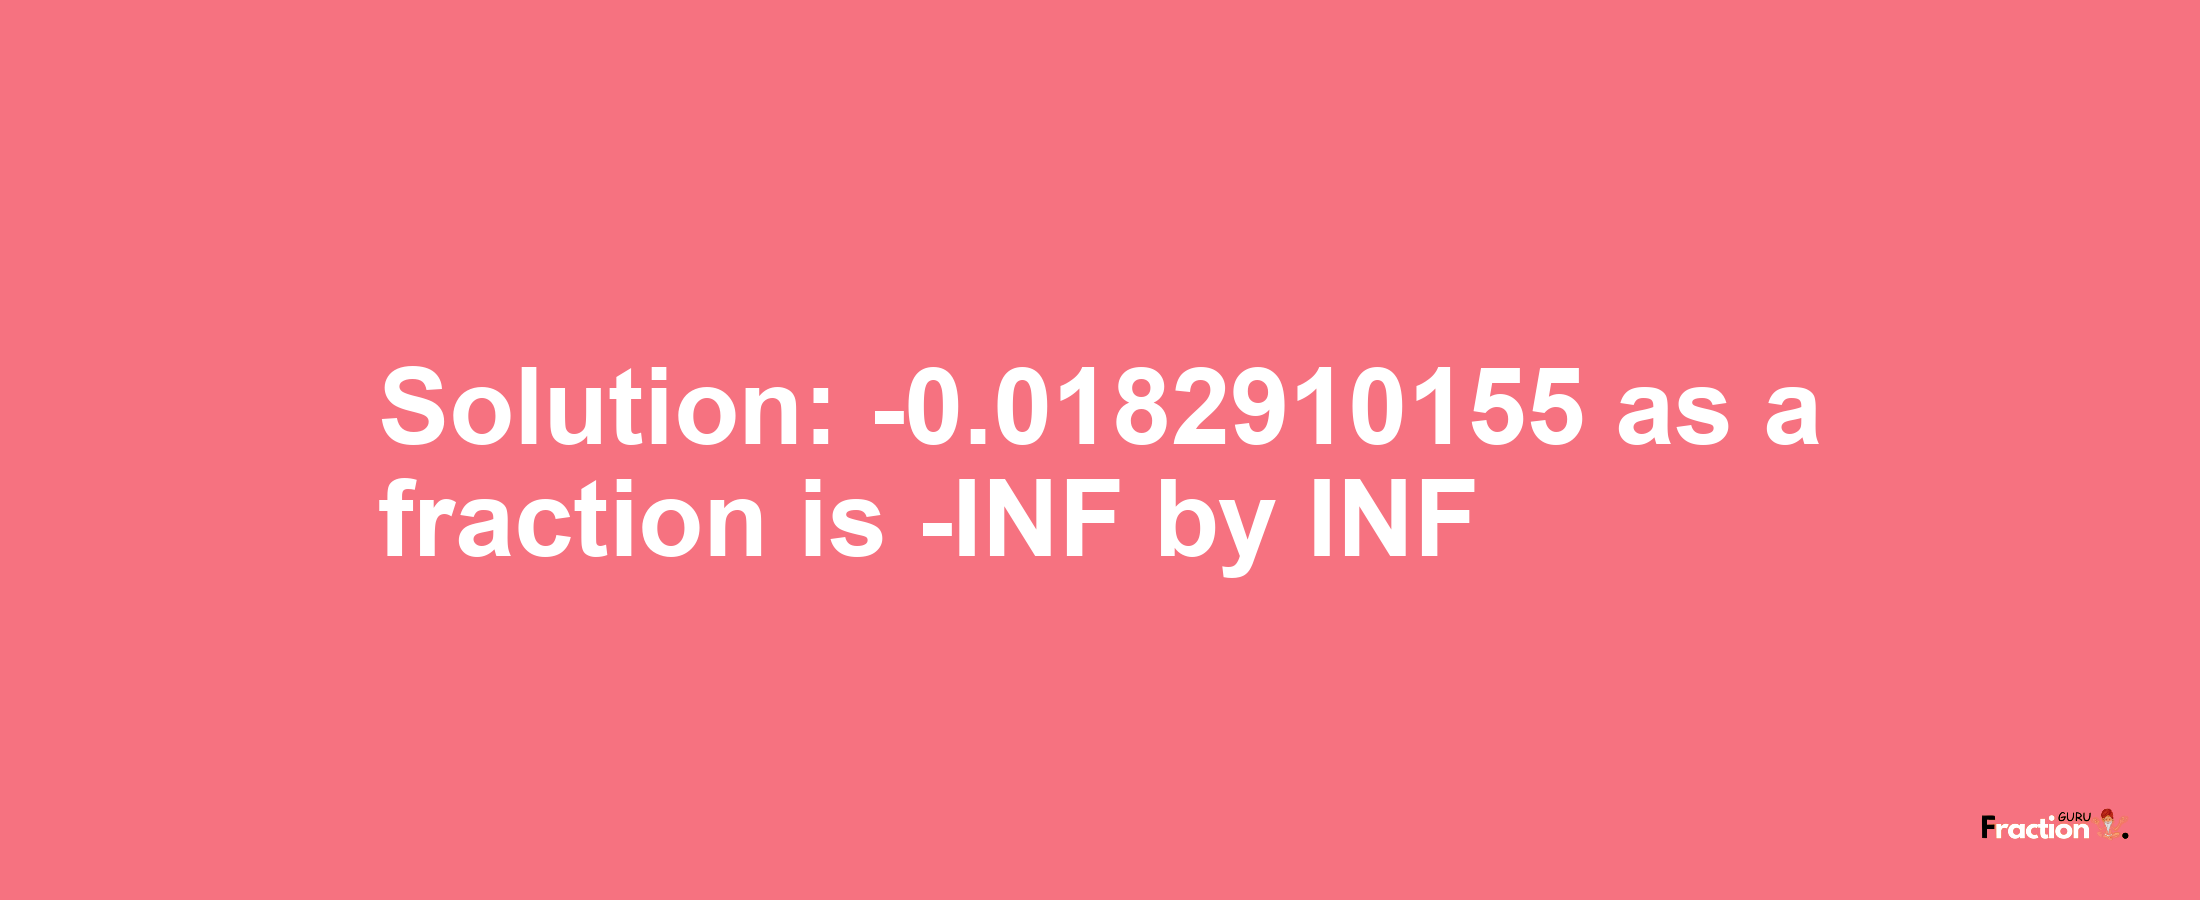 Solution:-0.0182910155 as a fraction is -INF/INF